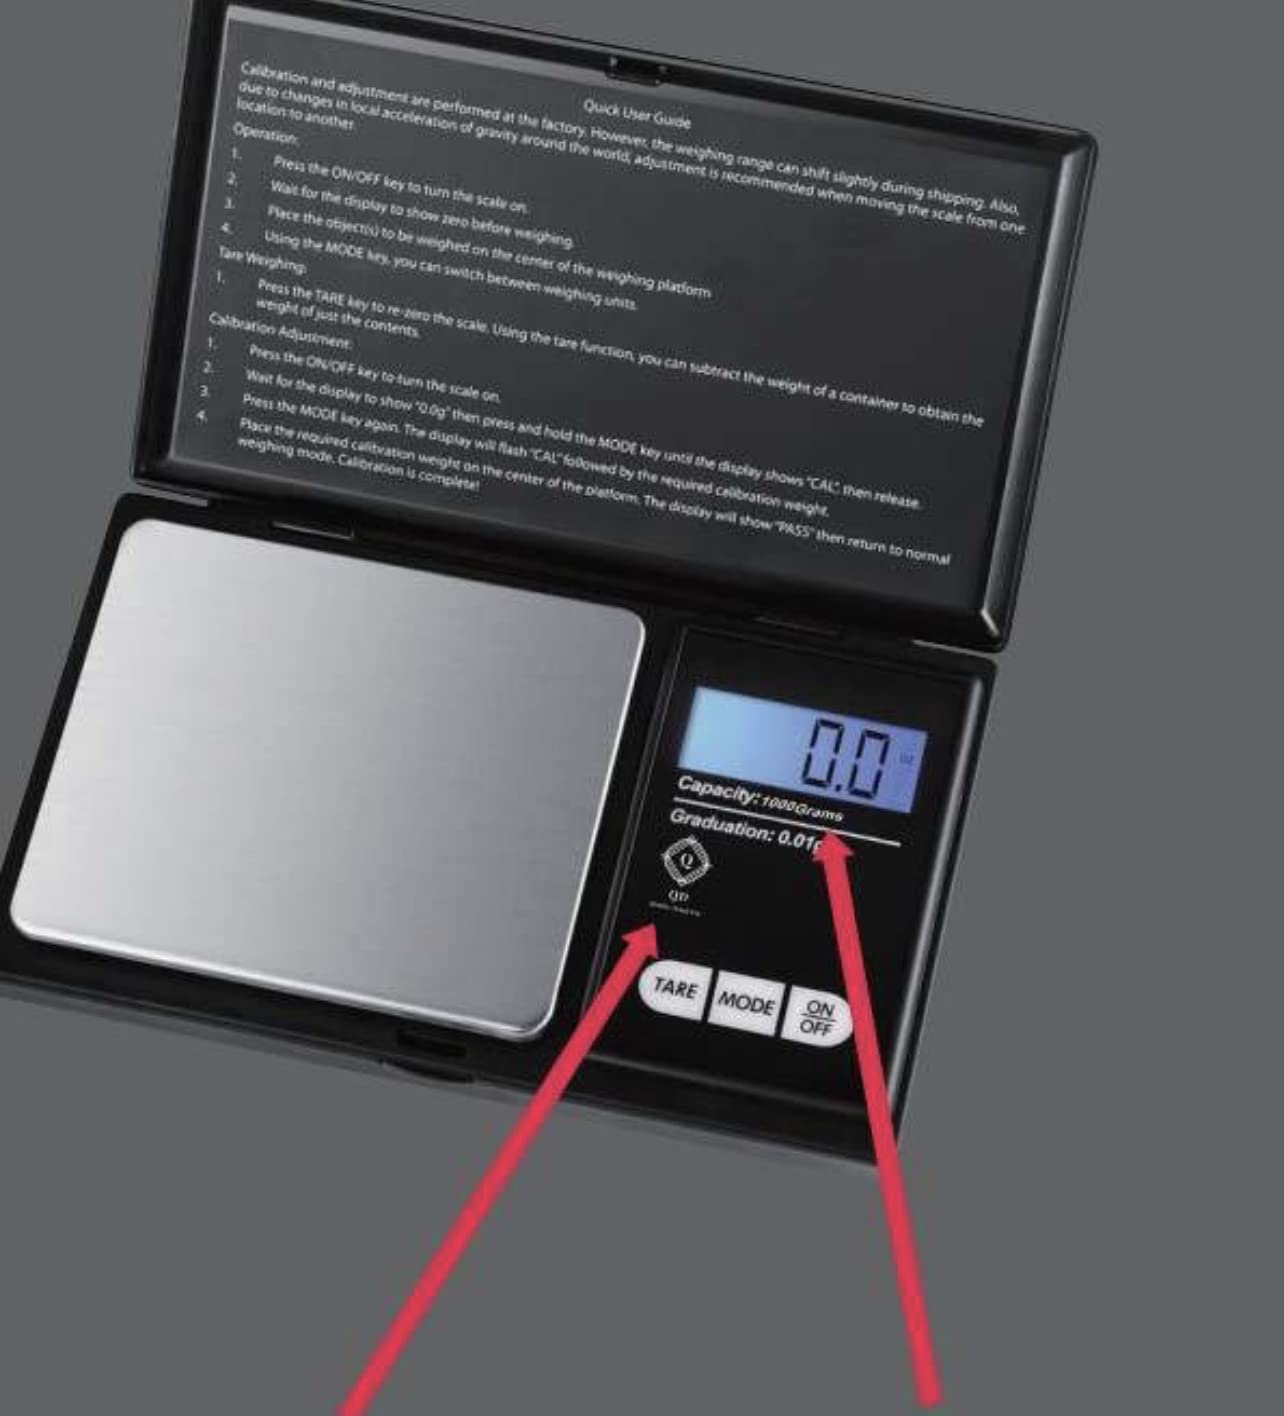 If Your Pocket Digital Scale Doesn't Read 1,000 Grams or Better It's Pointless! Quality Detail Luxury Hand Held Special Edition! 1000g which is Equal to About 2.2lbs Perfect for On The Go!